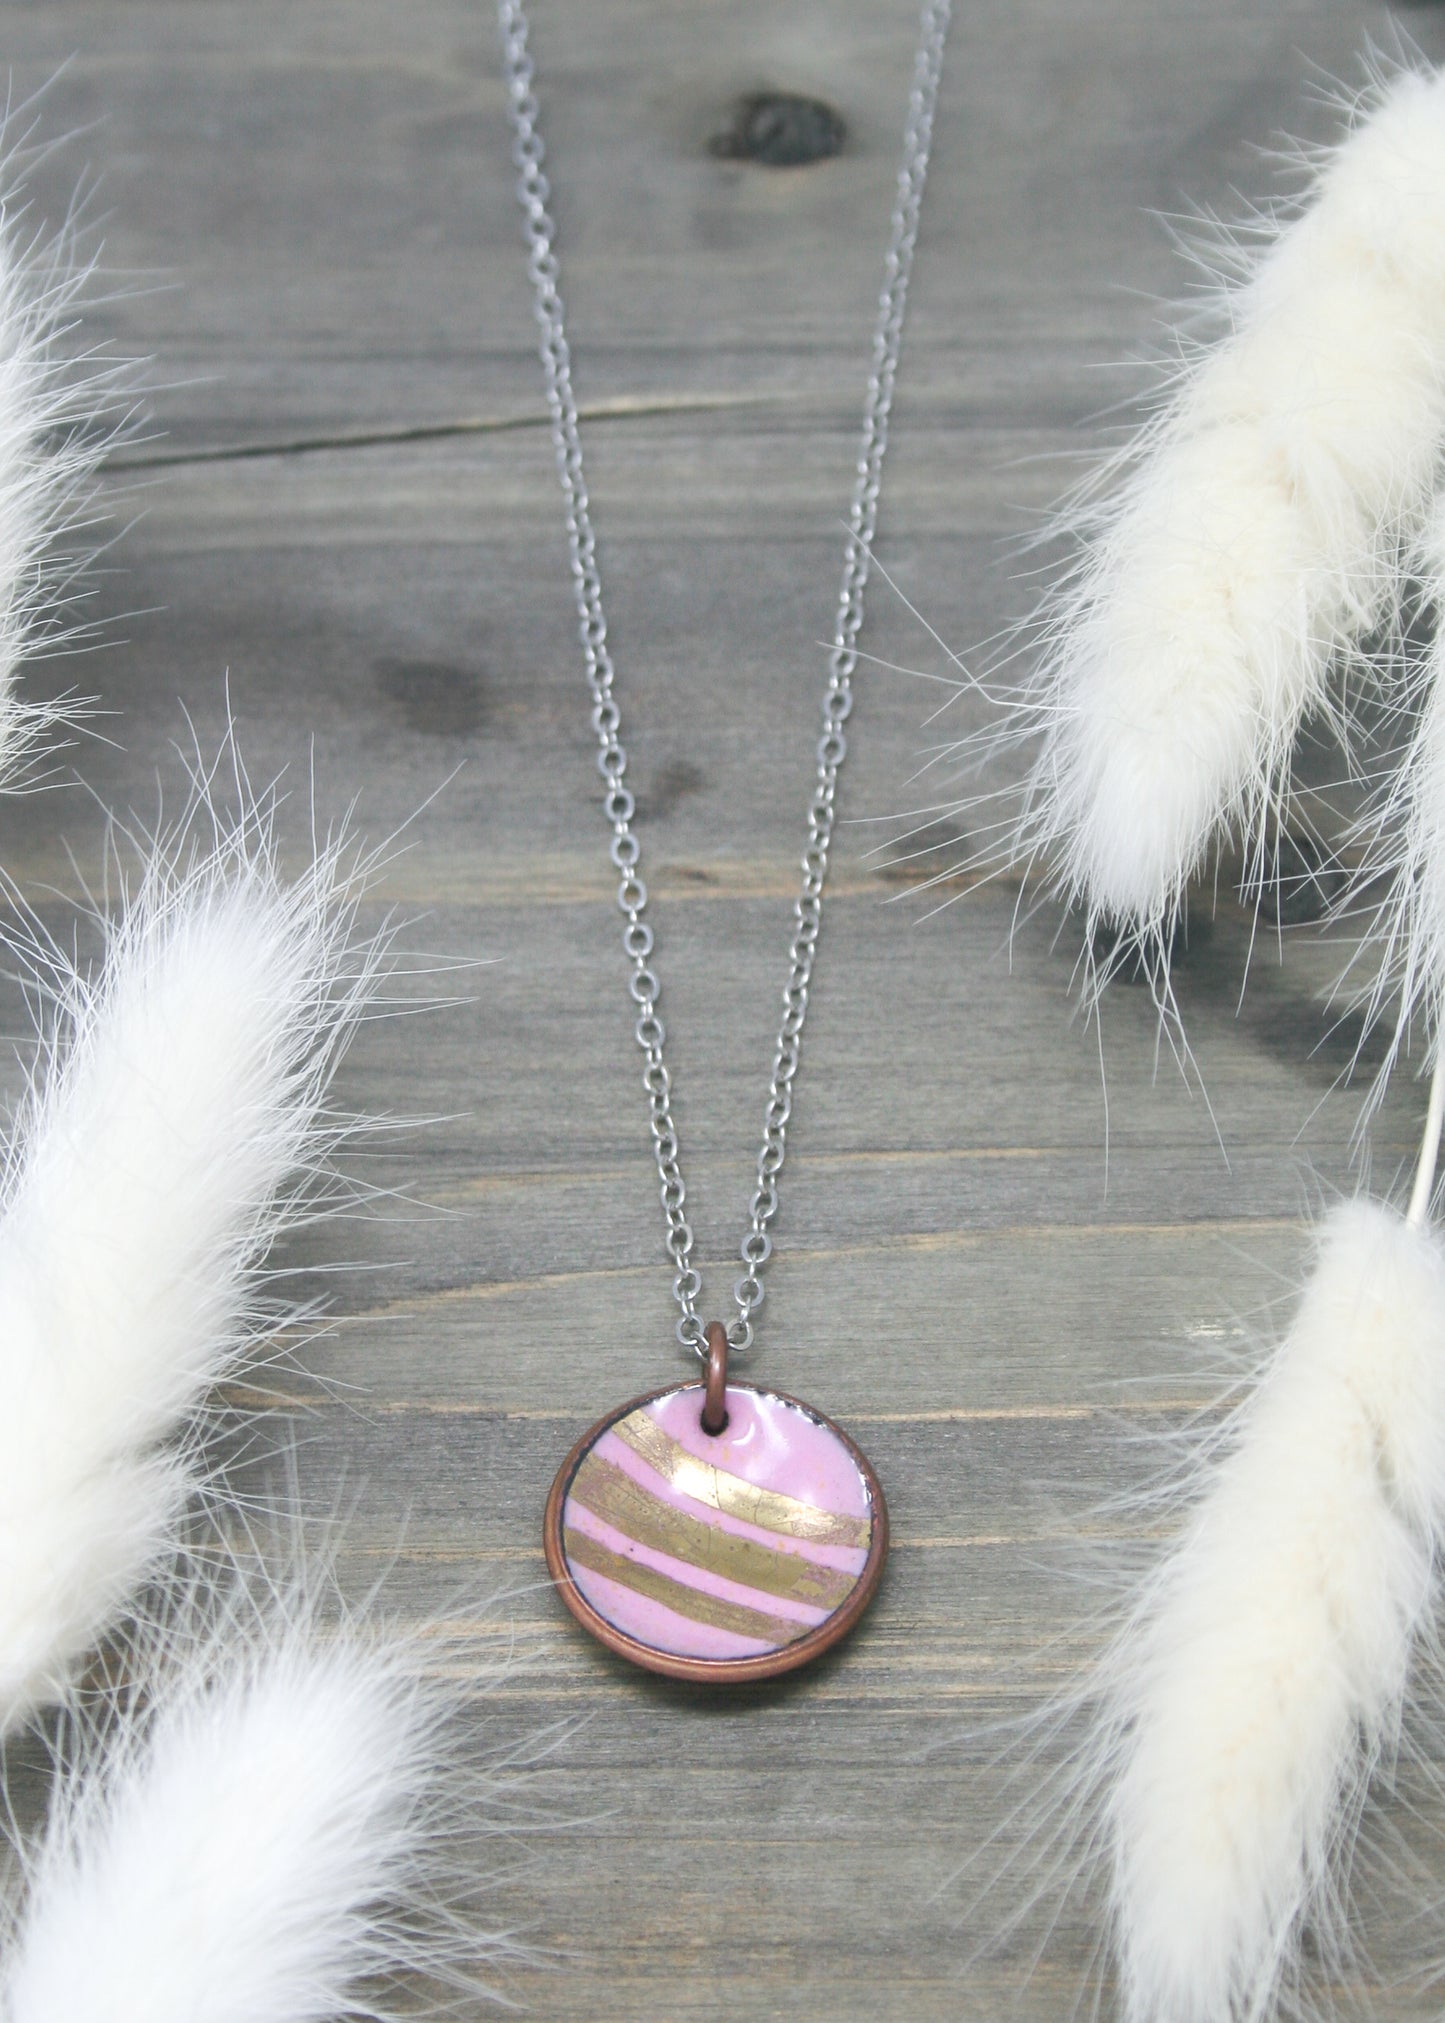 a necklace with a pink and gold striped disc on a chain